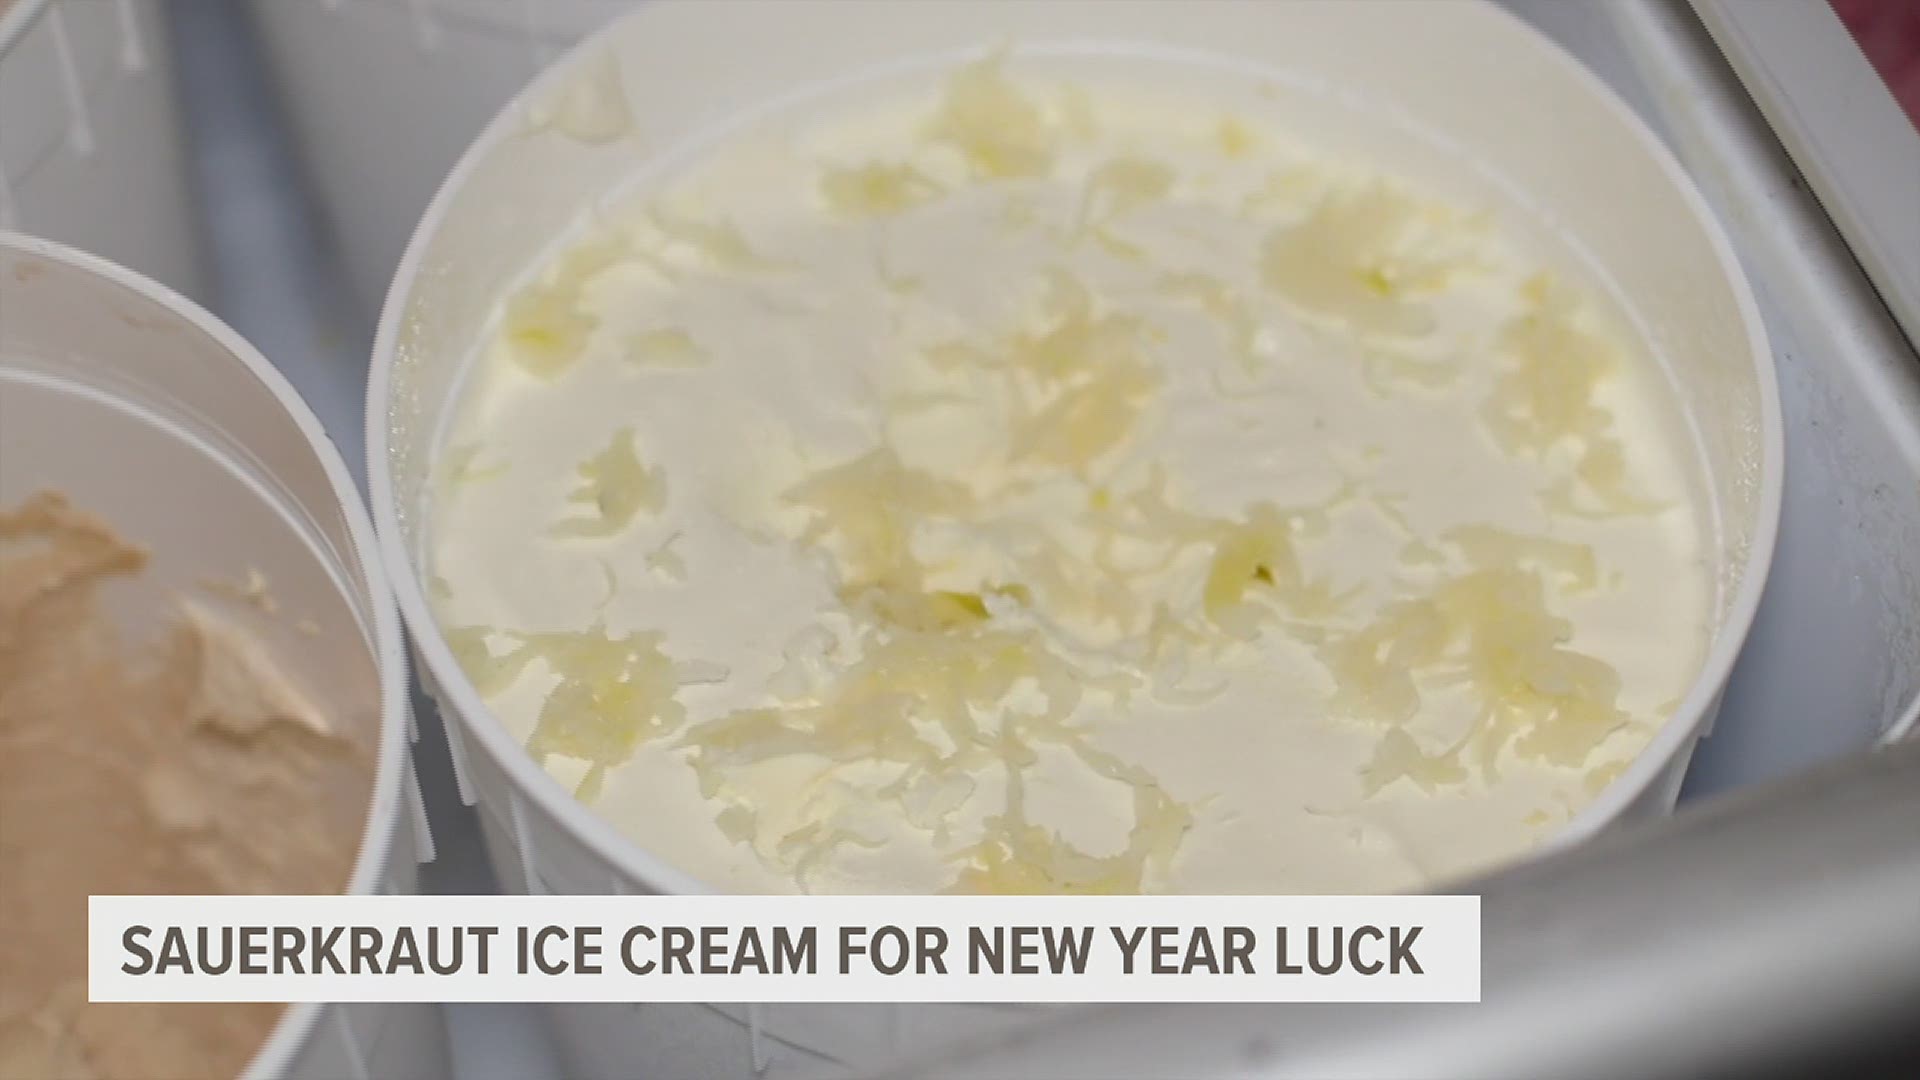 Ice cream shop turns traditional New Year dish into something tasty.